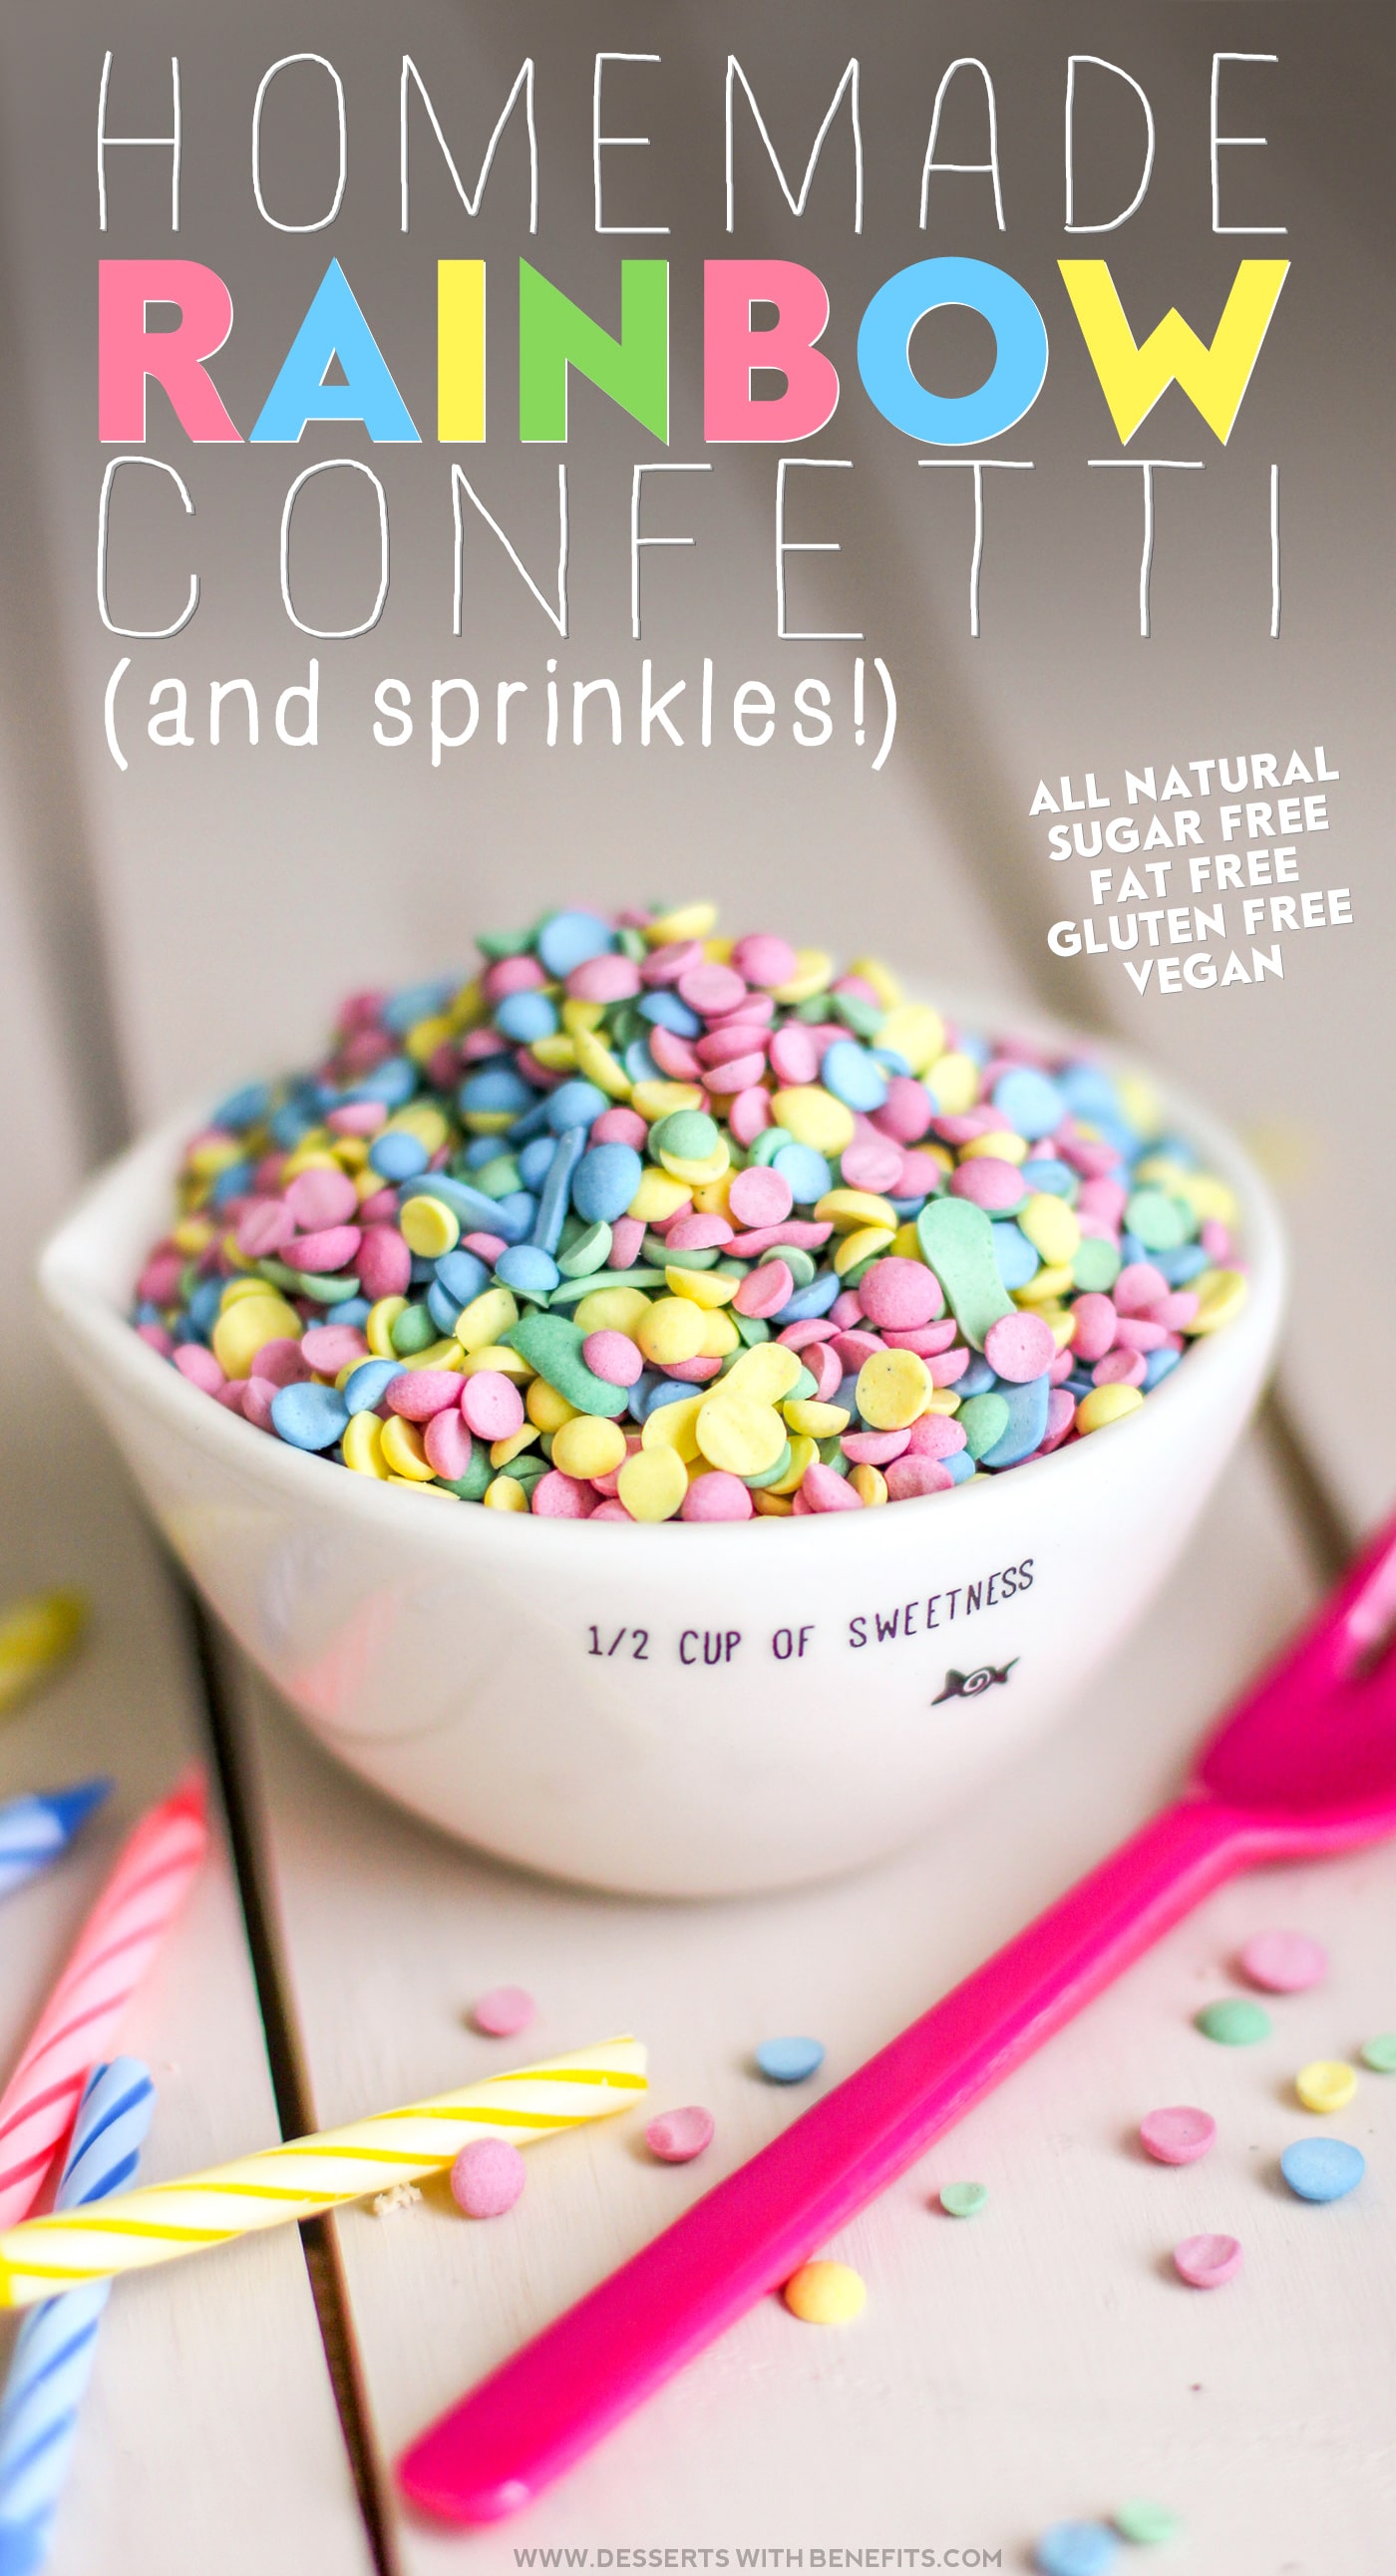 How To Make 4-ingredient Homemade Rainbow Sprinkles and Nonpareils